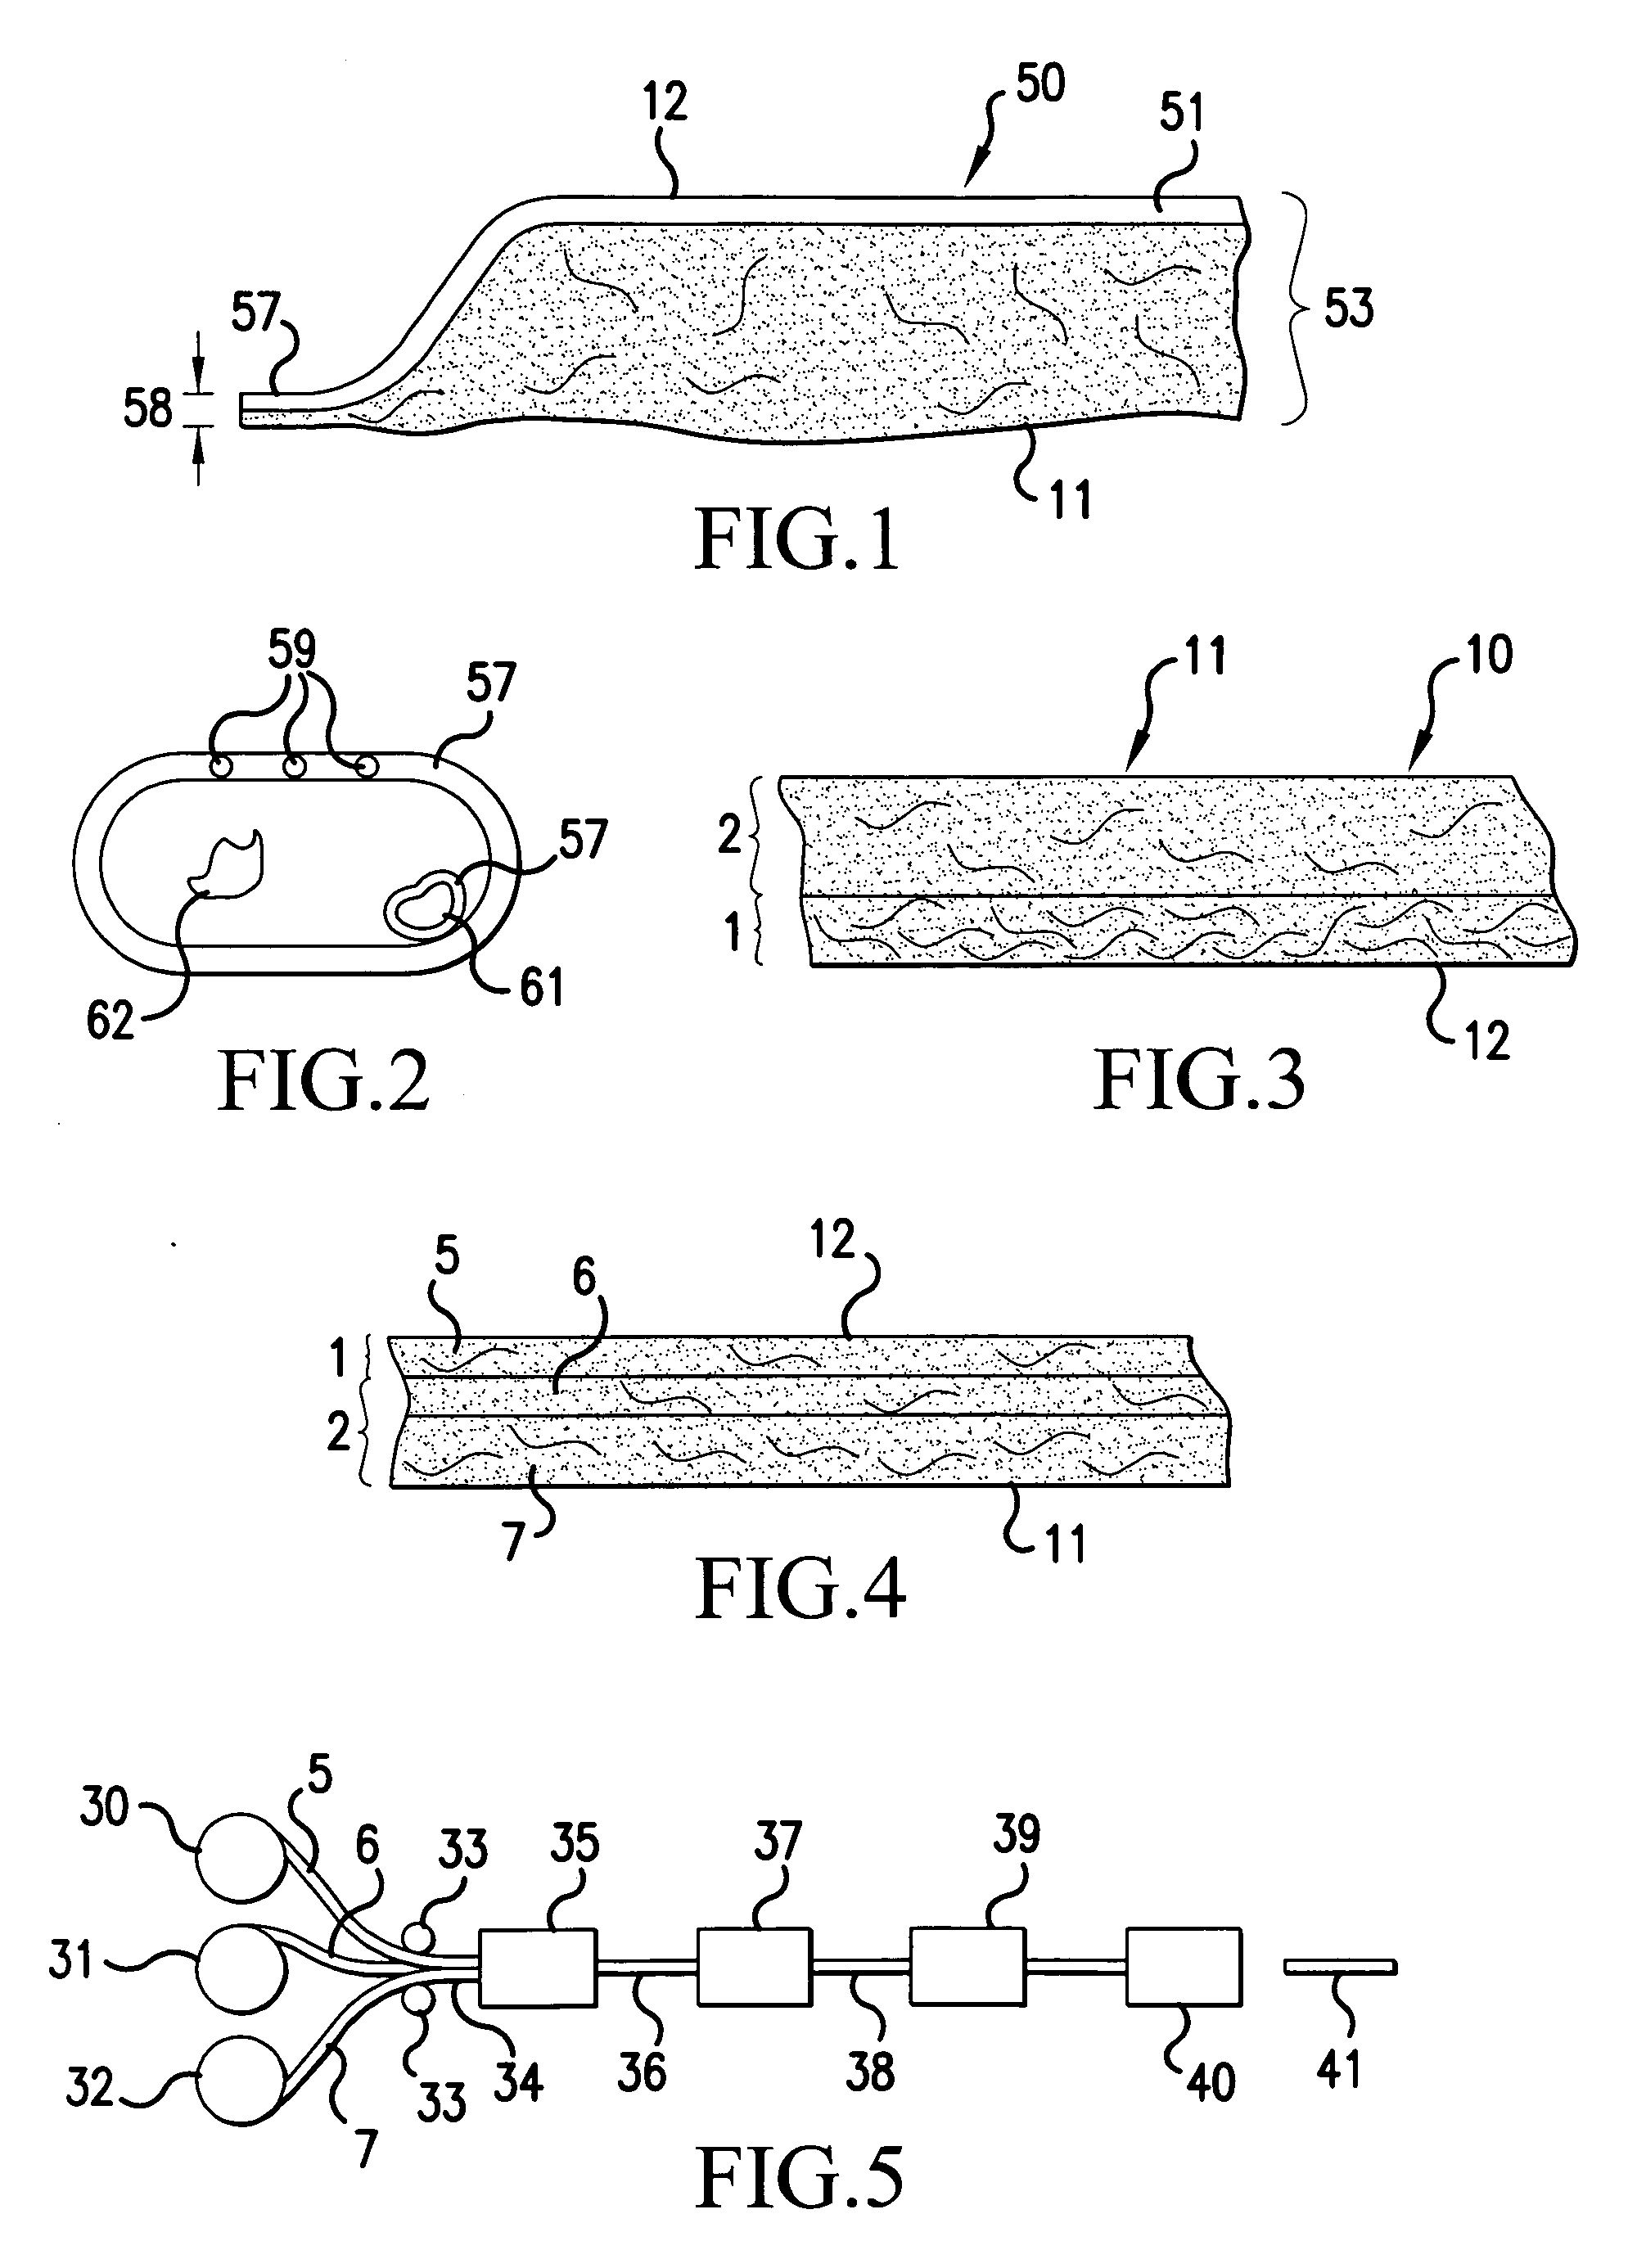 Molded and shaped acoustical insulating vehicle panel and method of making the same